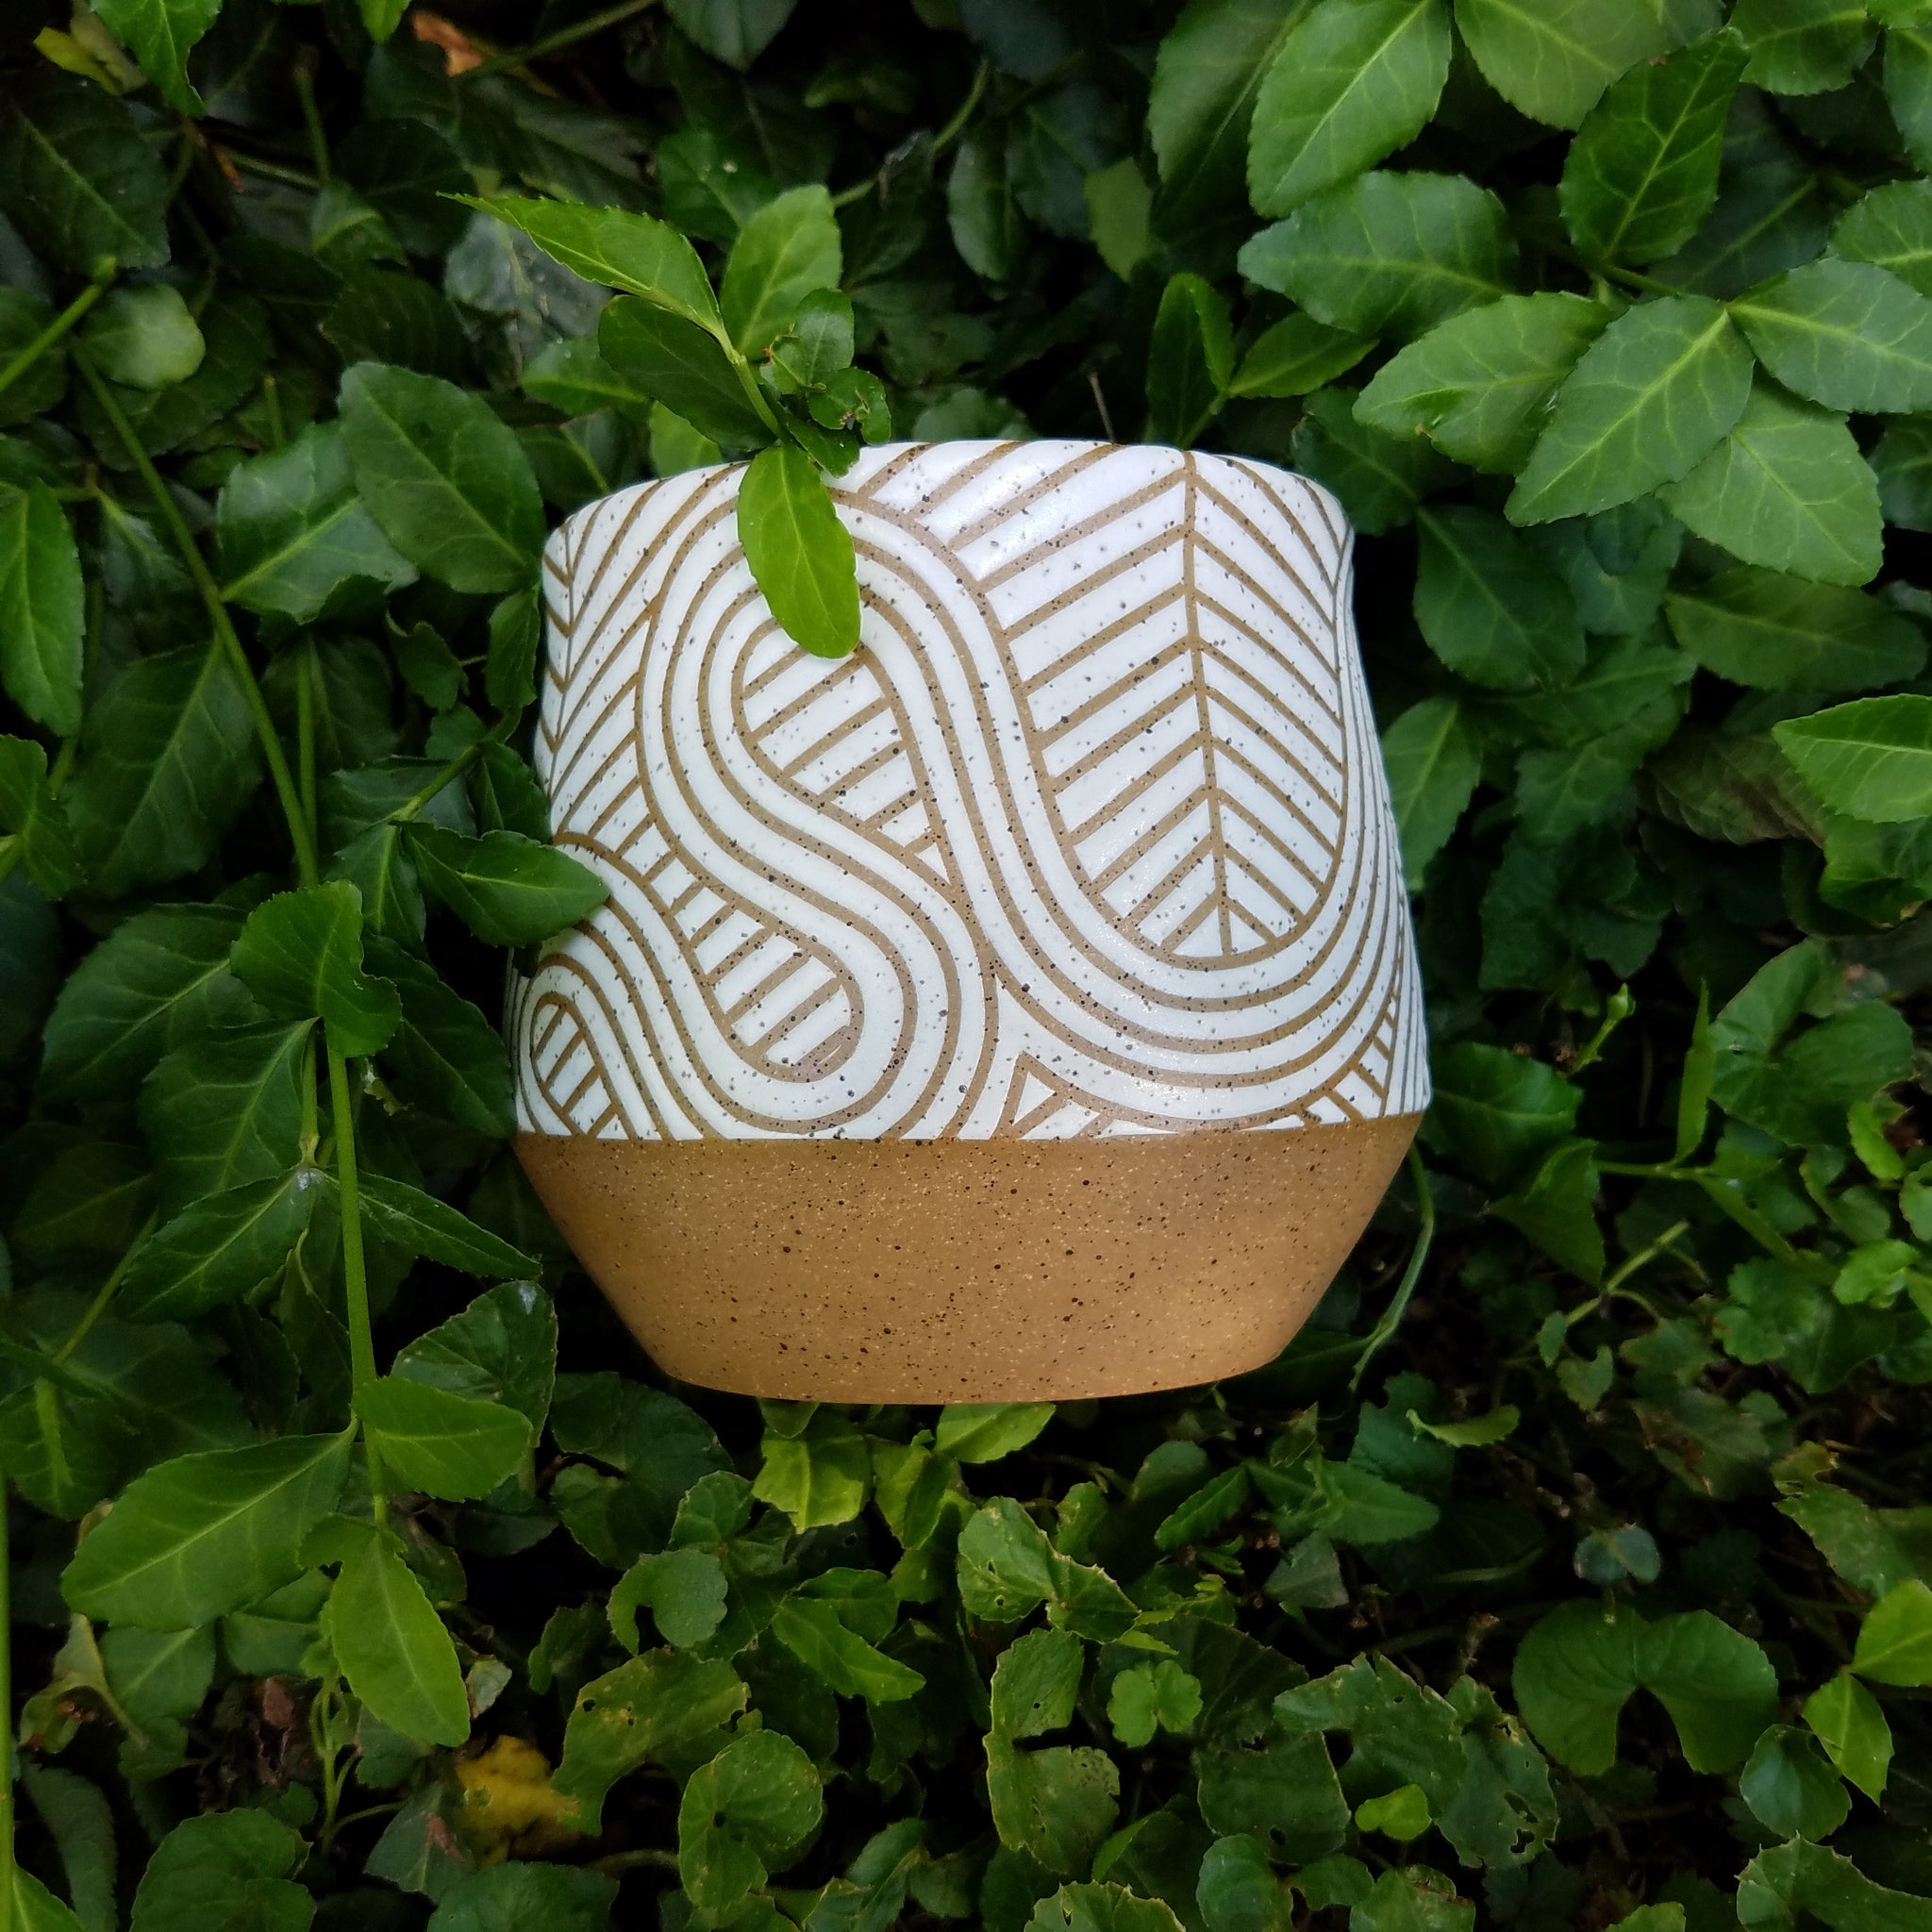 Small Planter - White on Speckled Clay